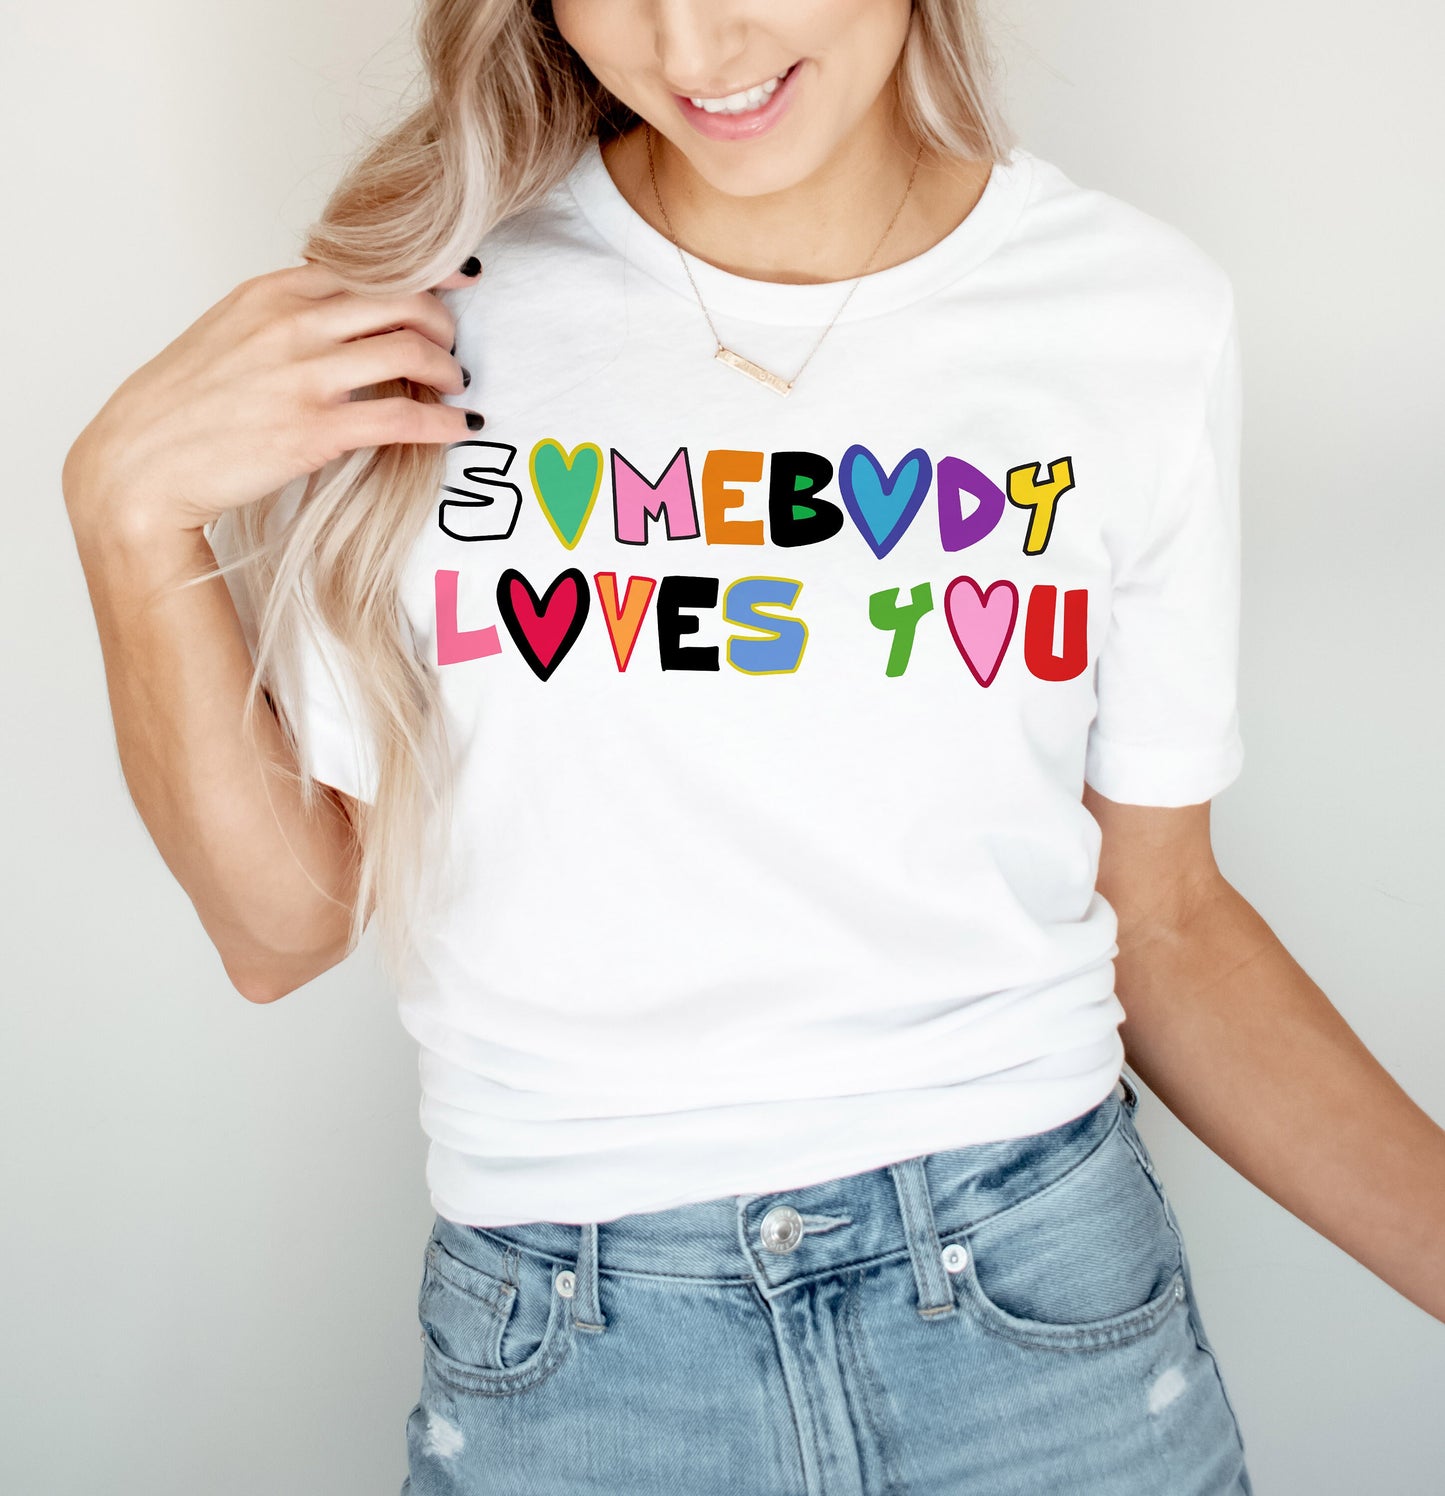 Somebody Loves You 1980's Colorful Style Retro Boho Hippie Style Ultra Soft Graphic Tee Unisex Soft Tee T-shirt for Women or Men